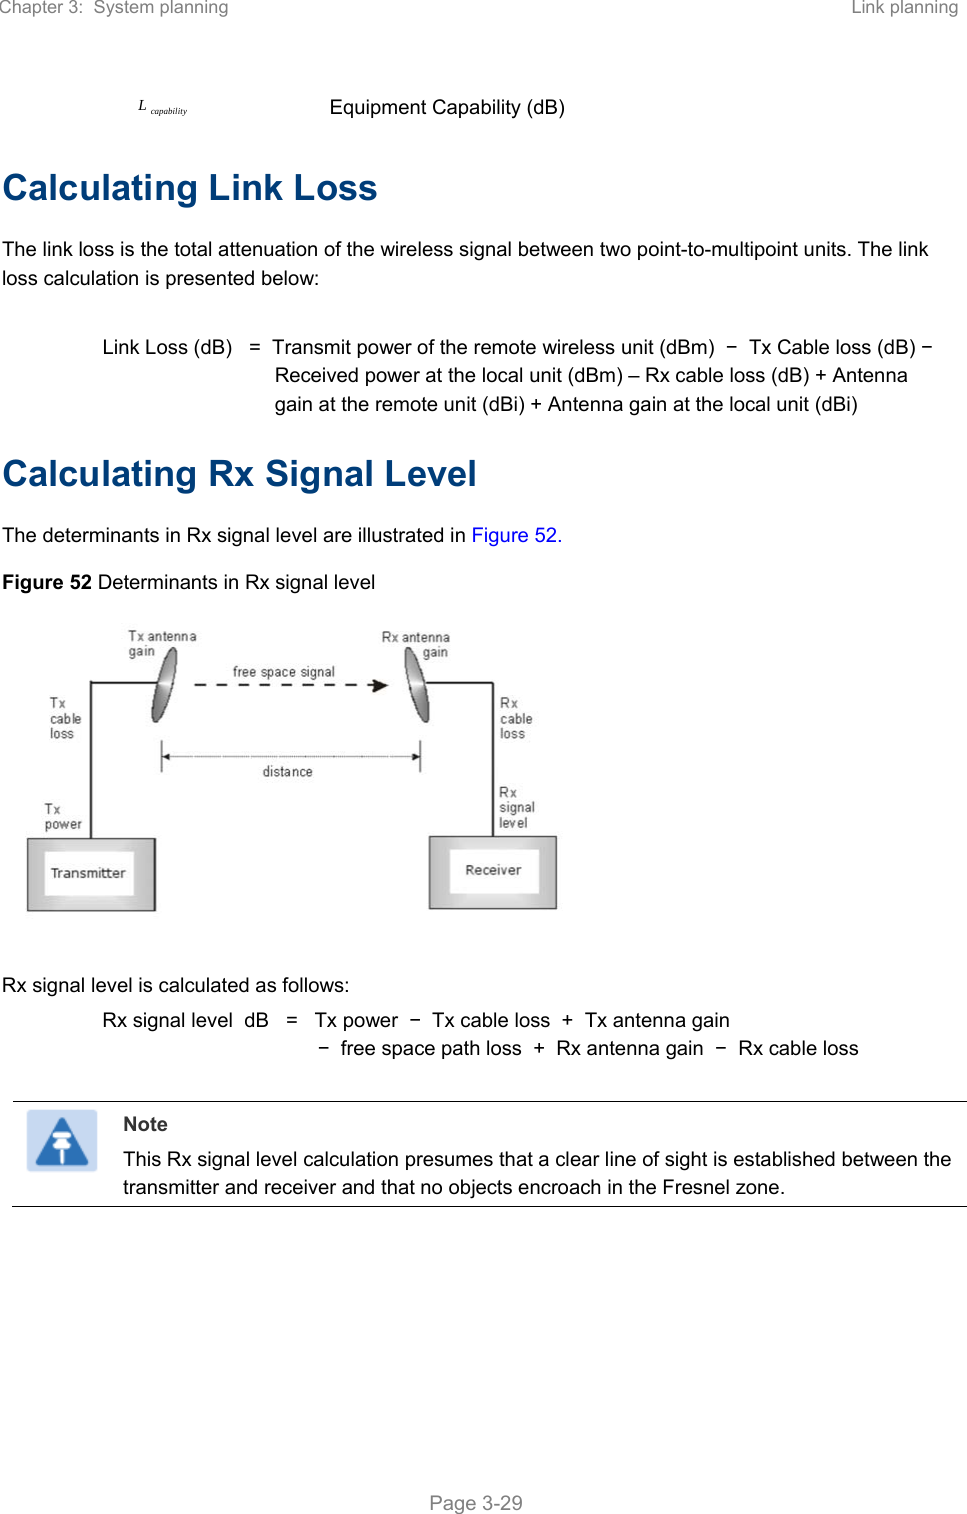 Chapter 3:  System planning  Link planning   Page 3-29 capabilityL Equipment Capability (dB) Calculating Link Loss The link loss is the total attenuation of the wireless signal between two point-to-multipoint units. The link loss calculation is presented below:  Link Loss (dB)   =  Transmit power of the remote wireless unit (dBm)  −  Tx Cable loss (dB) −  Received power at the local unit (dBm) – Rx cable loss (dB) + Antenna gain at the remote unit (dBi) + Antenna gain at the local unit (dBi) Calculating Rx Signal Level The determinants in Rx signal level are illustrated in Figure 52. Figure 52 Determinants in Rx signal level   Rx signal level is calculated as follows: Rx signal level  dB   =   Tx power  −  Tx cable loss  +  Tx antenna gain   −  free space path loss  +  Rx antenna gain  −  Rx cable loss   Note This Rx signal level calculation presumes that a clear line of sight is established between the transmitter and receiver and that no objects encroach in the Fresnel zone.  